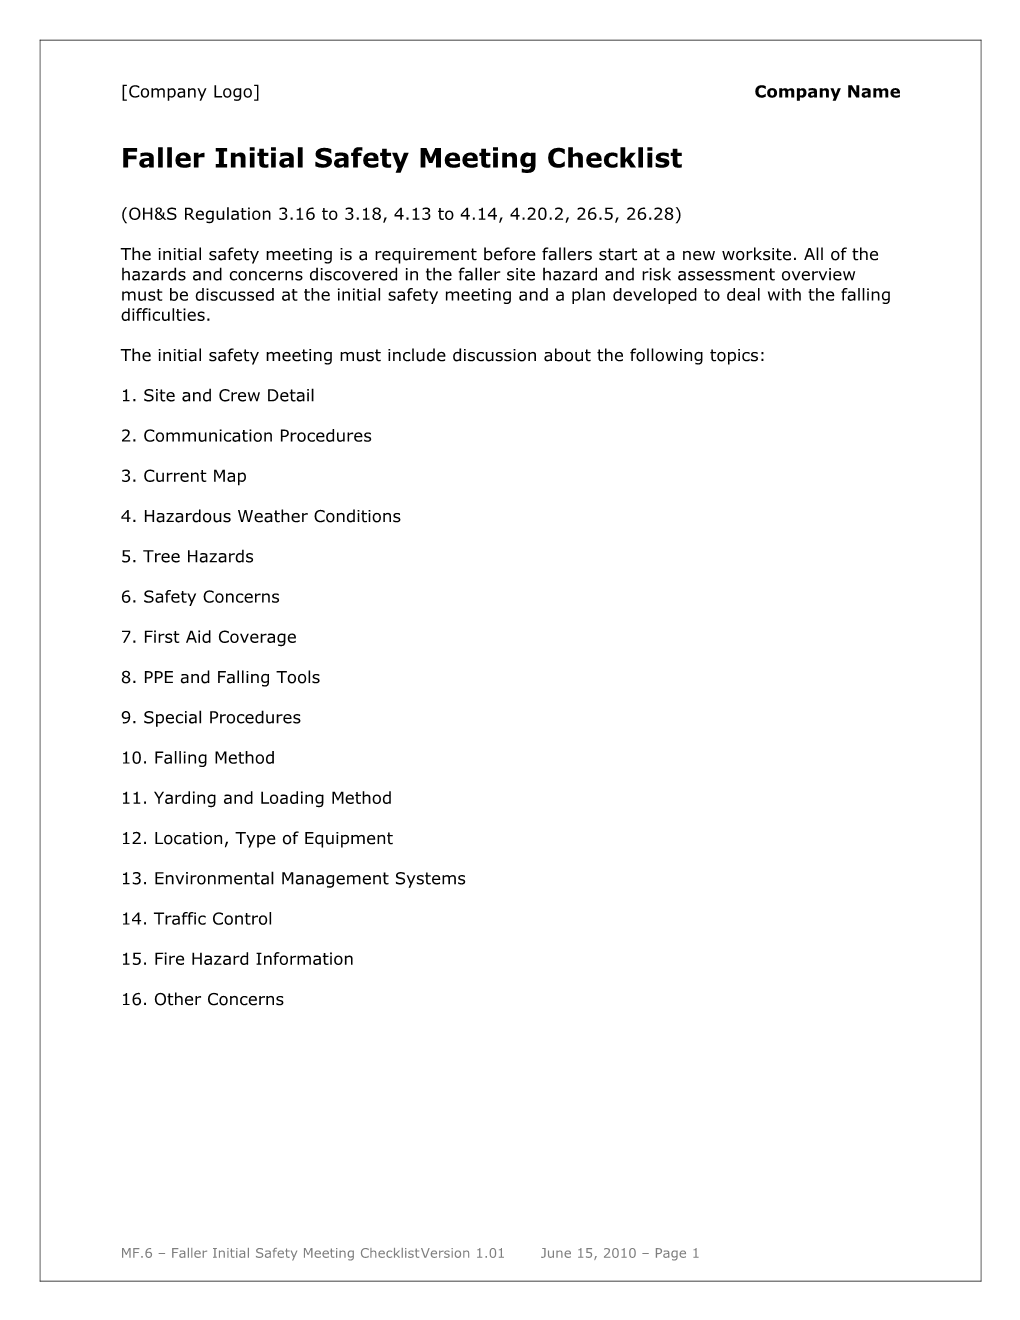 Faller Initial Safety Meeting Checklist